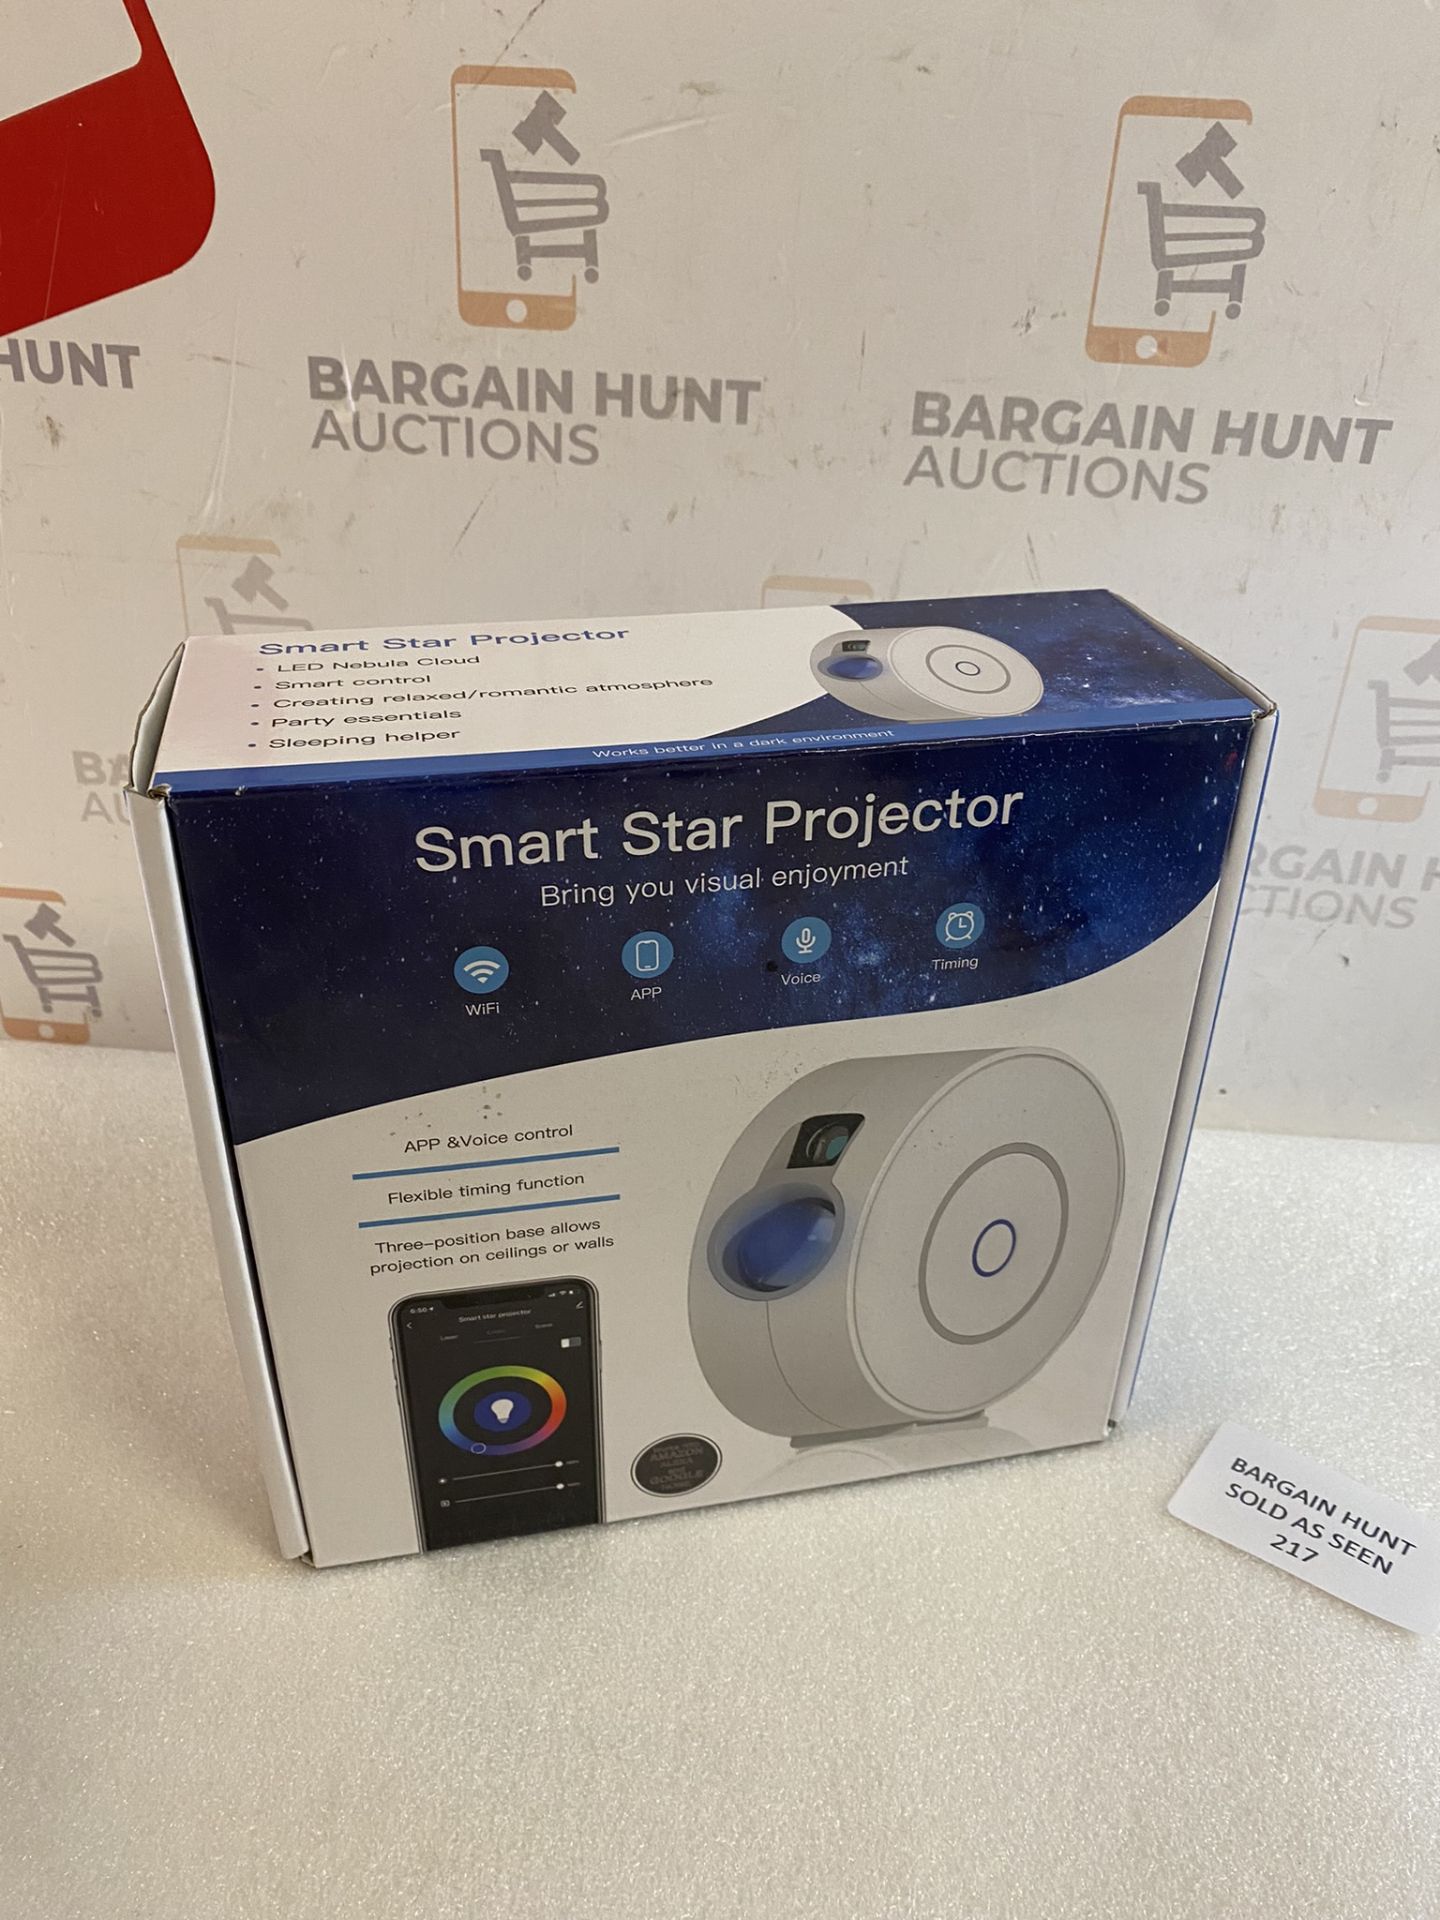 RRP £39.99 Nineaccy Galaxy Voice Control/ App Control Projector Star Night Light Projector - Image 2 of 2